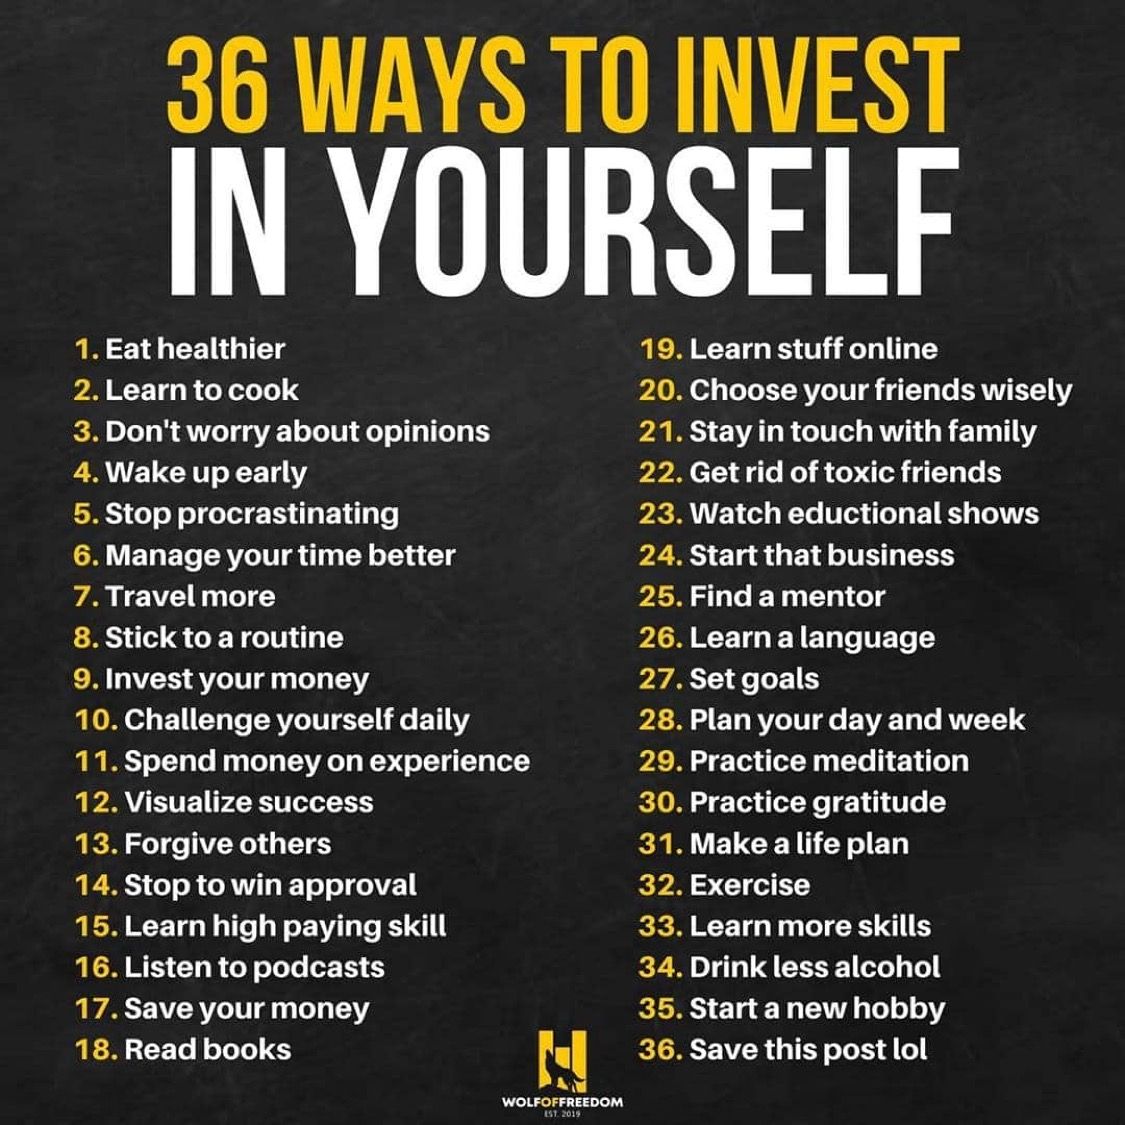 36 WAYS TO INVESTING IN YOUR